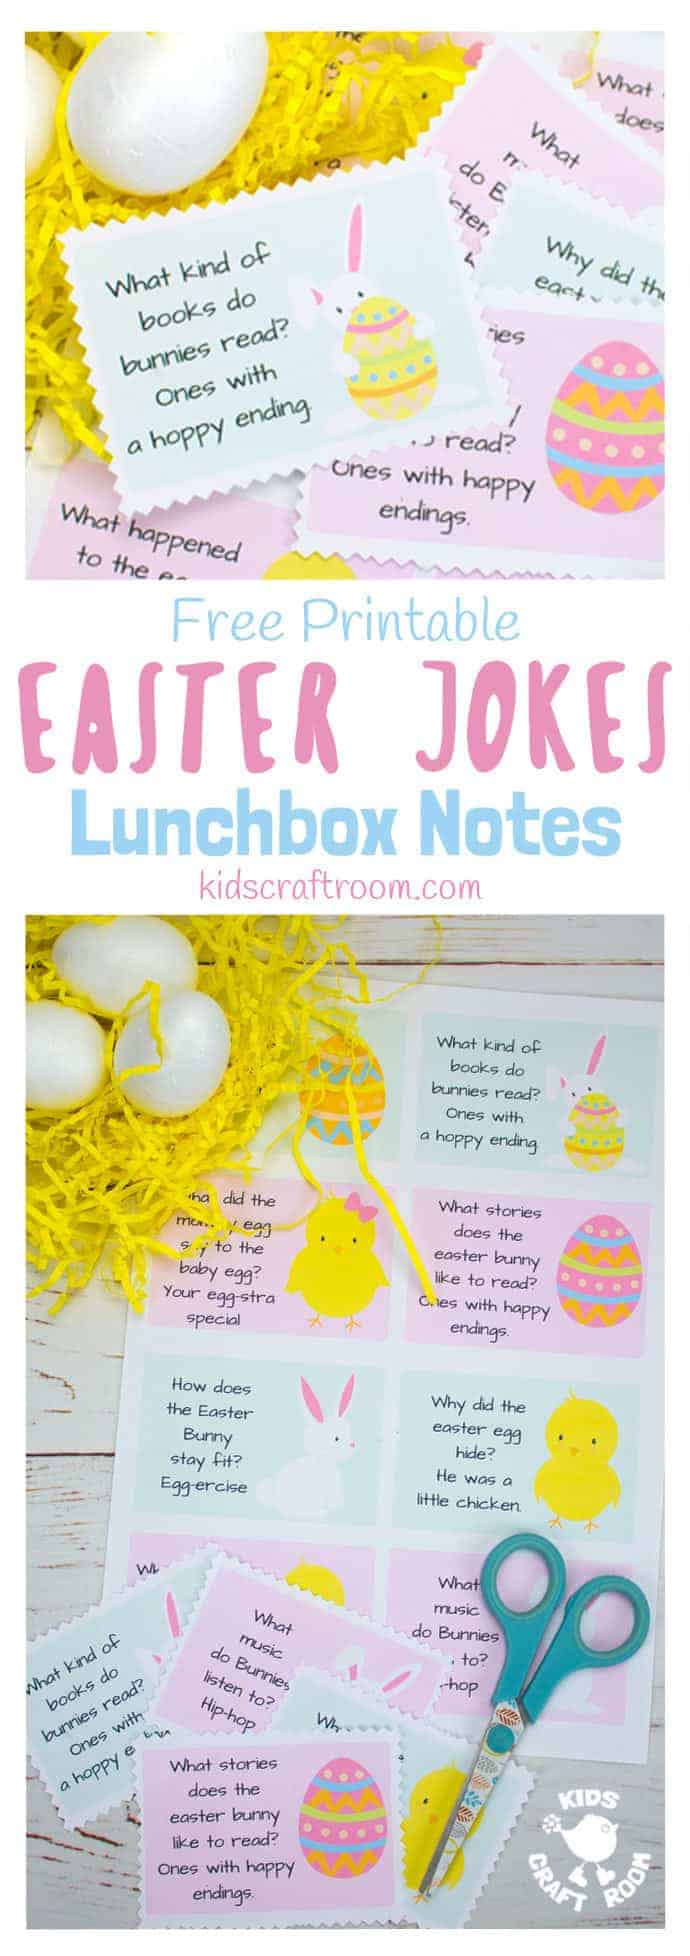 EASTER JOKES LUNCHBOX NOTES - Add some fun surprises to the Easter countdown with free printable Easter Joke Lunchbox Notes. With jolly pictures and family friendly jokes these are great for popping into lunchboxes, pockets and backpacks! #easter #jokes #lunchboxnotes #easterlunchboxnotes #easterjokes #backtoschool #printables #kidsactivities #freeprintables #lunch #kidslunchideas #kidscraftroom #easteractivities 